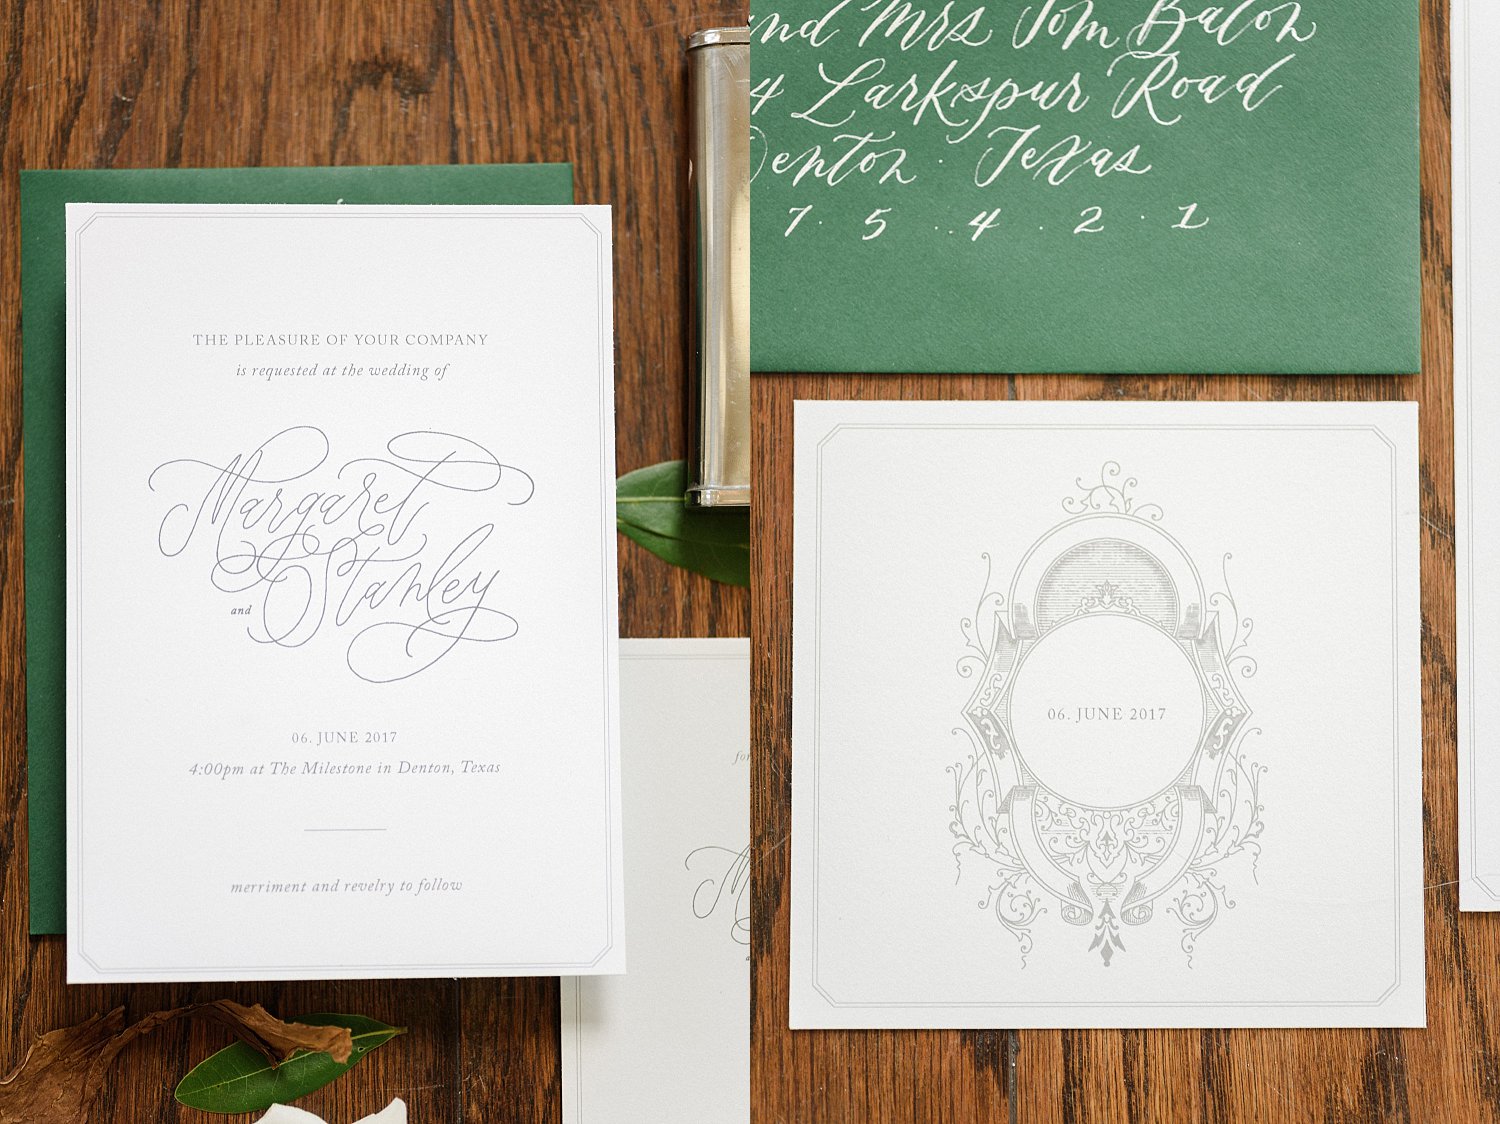 Wedding invitations with a green envelope and grey text on white paper